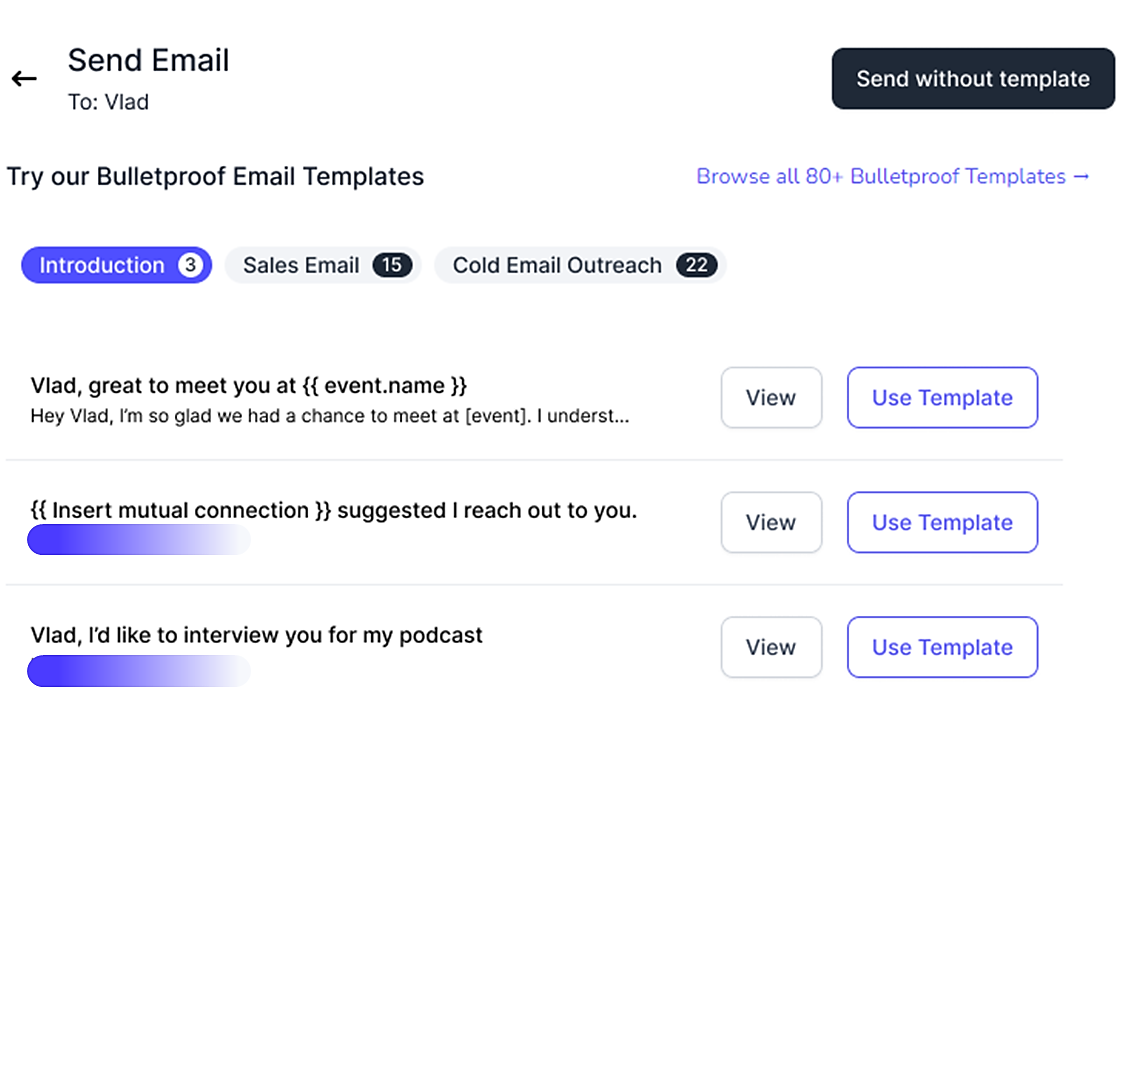 Boost sales conversions with 80+ bulletproof email templates